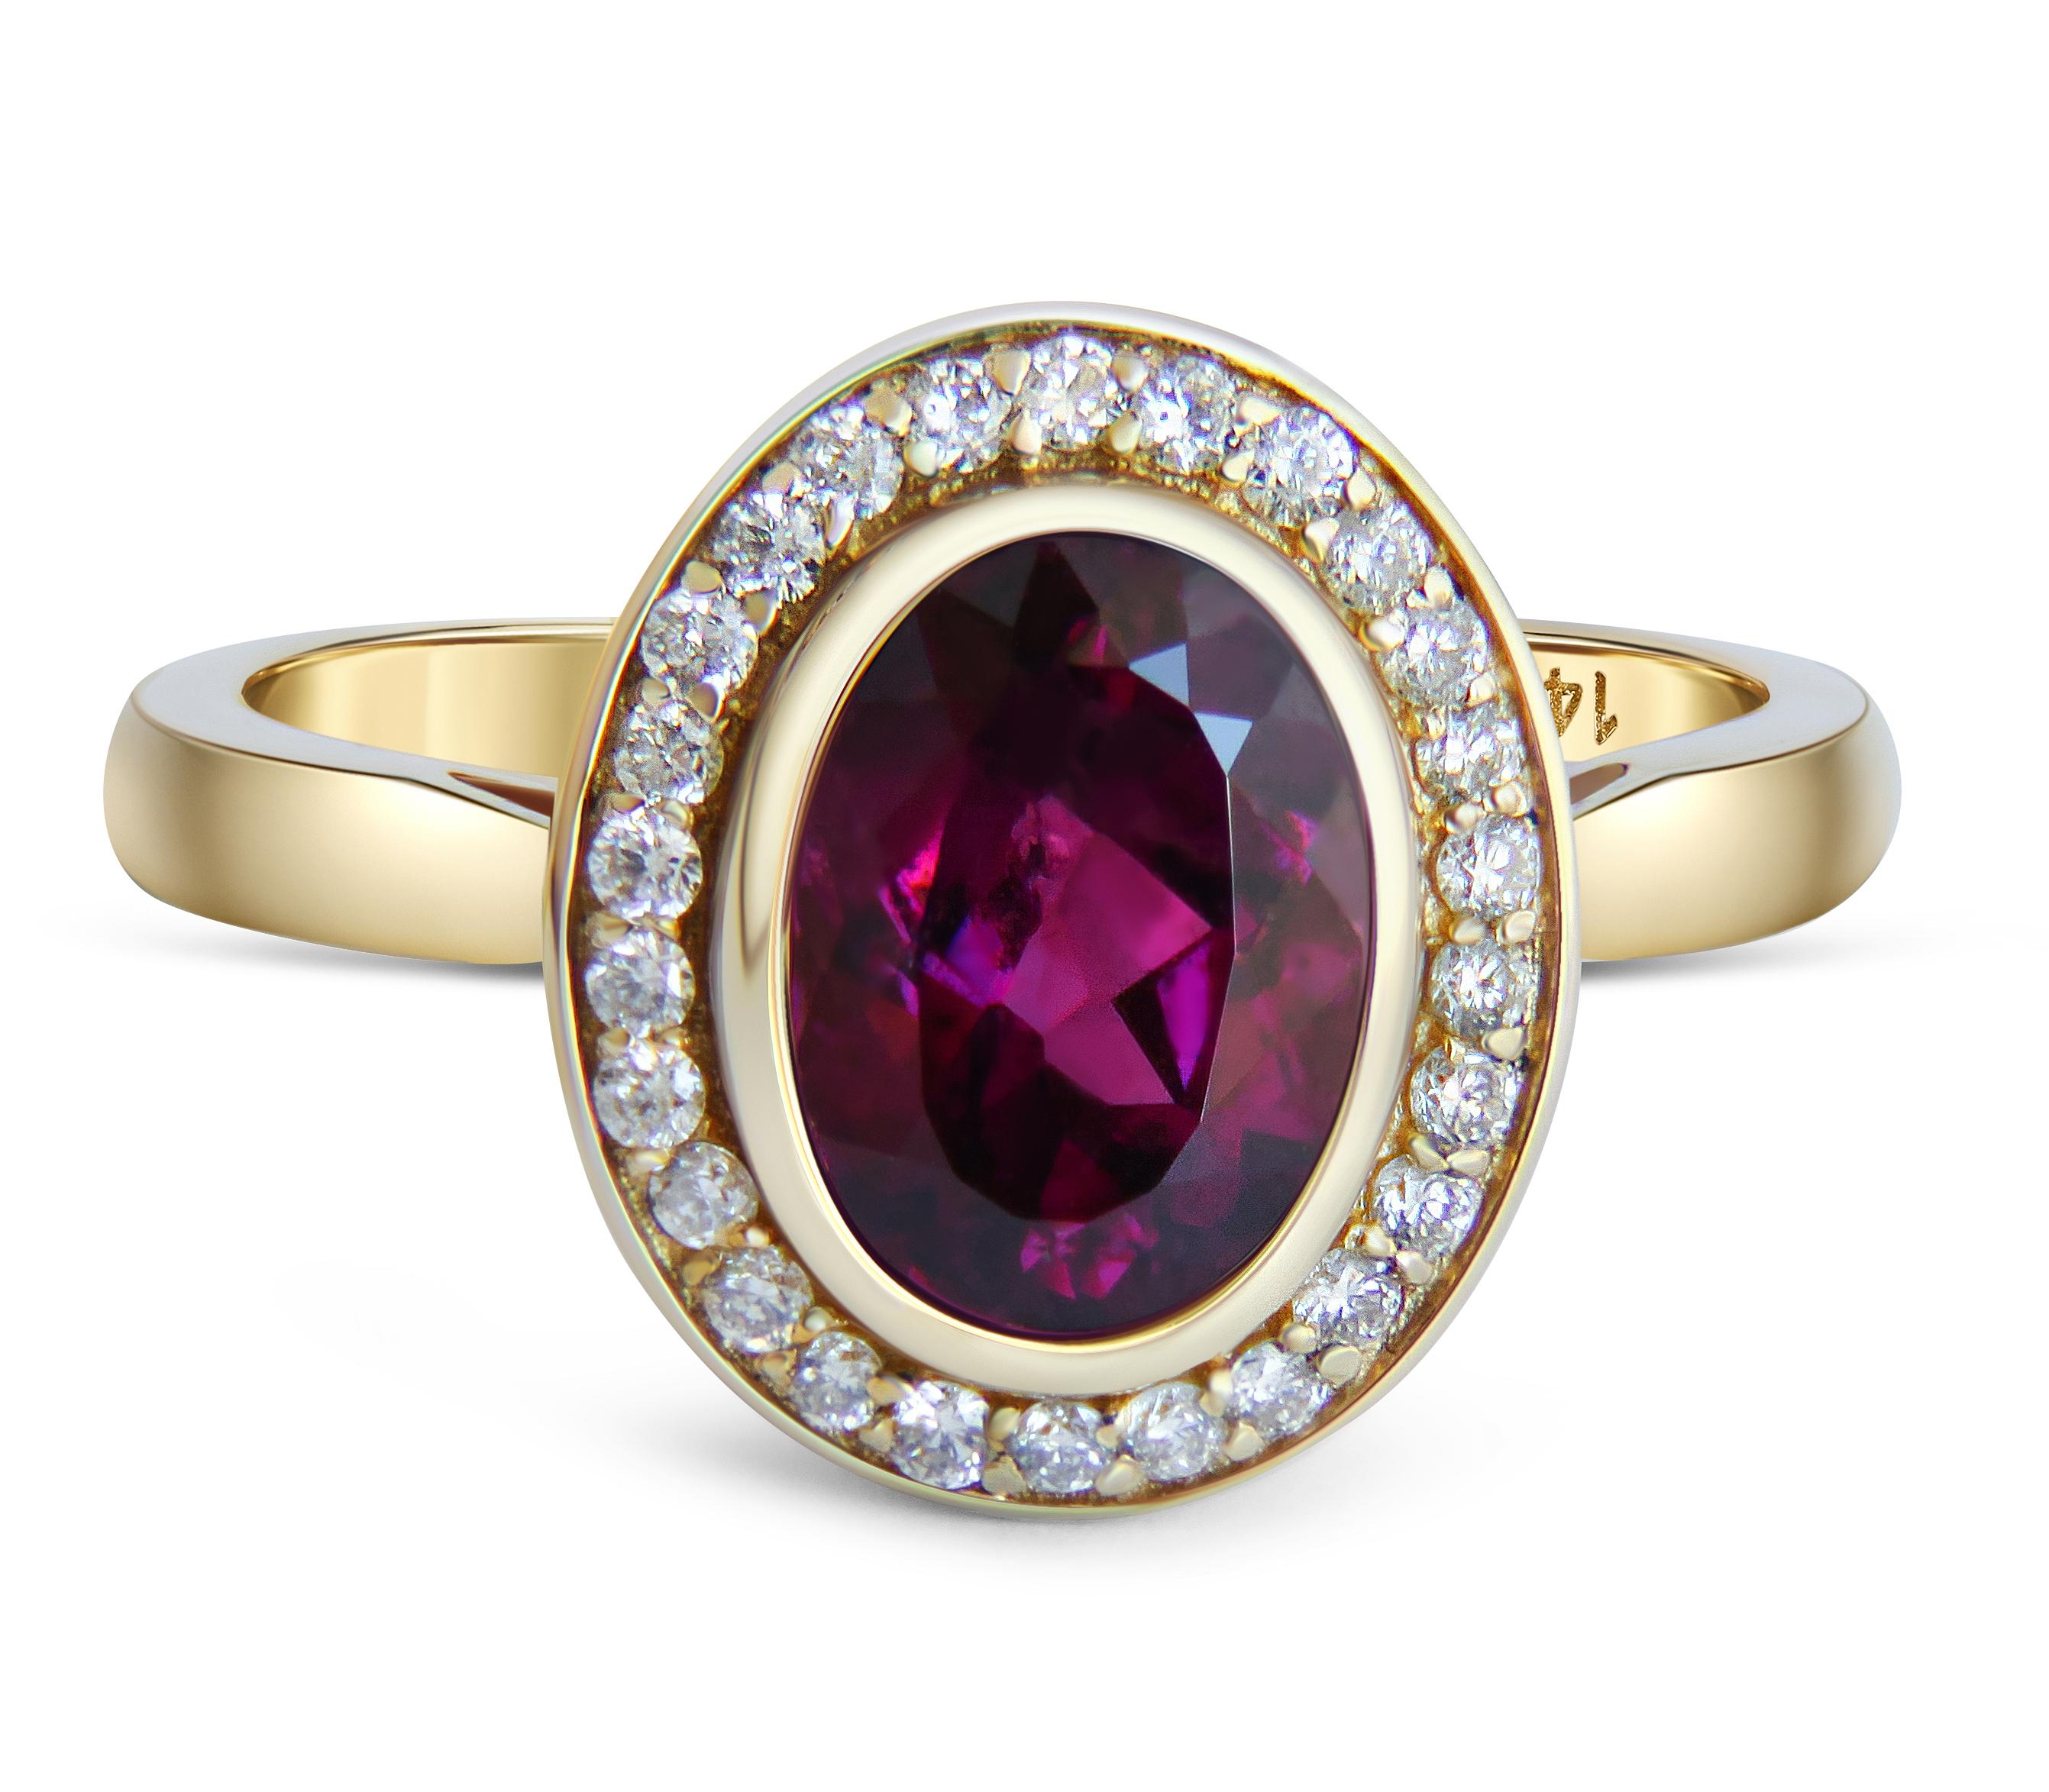 For Sale:  Garnet and diamonds 14k gold ring. 2